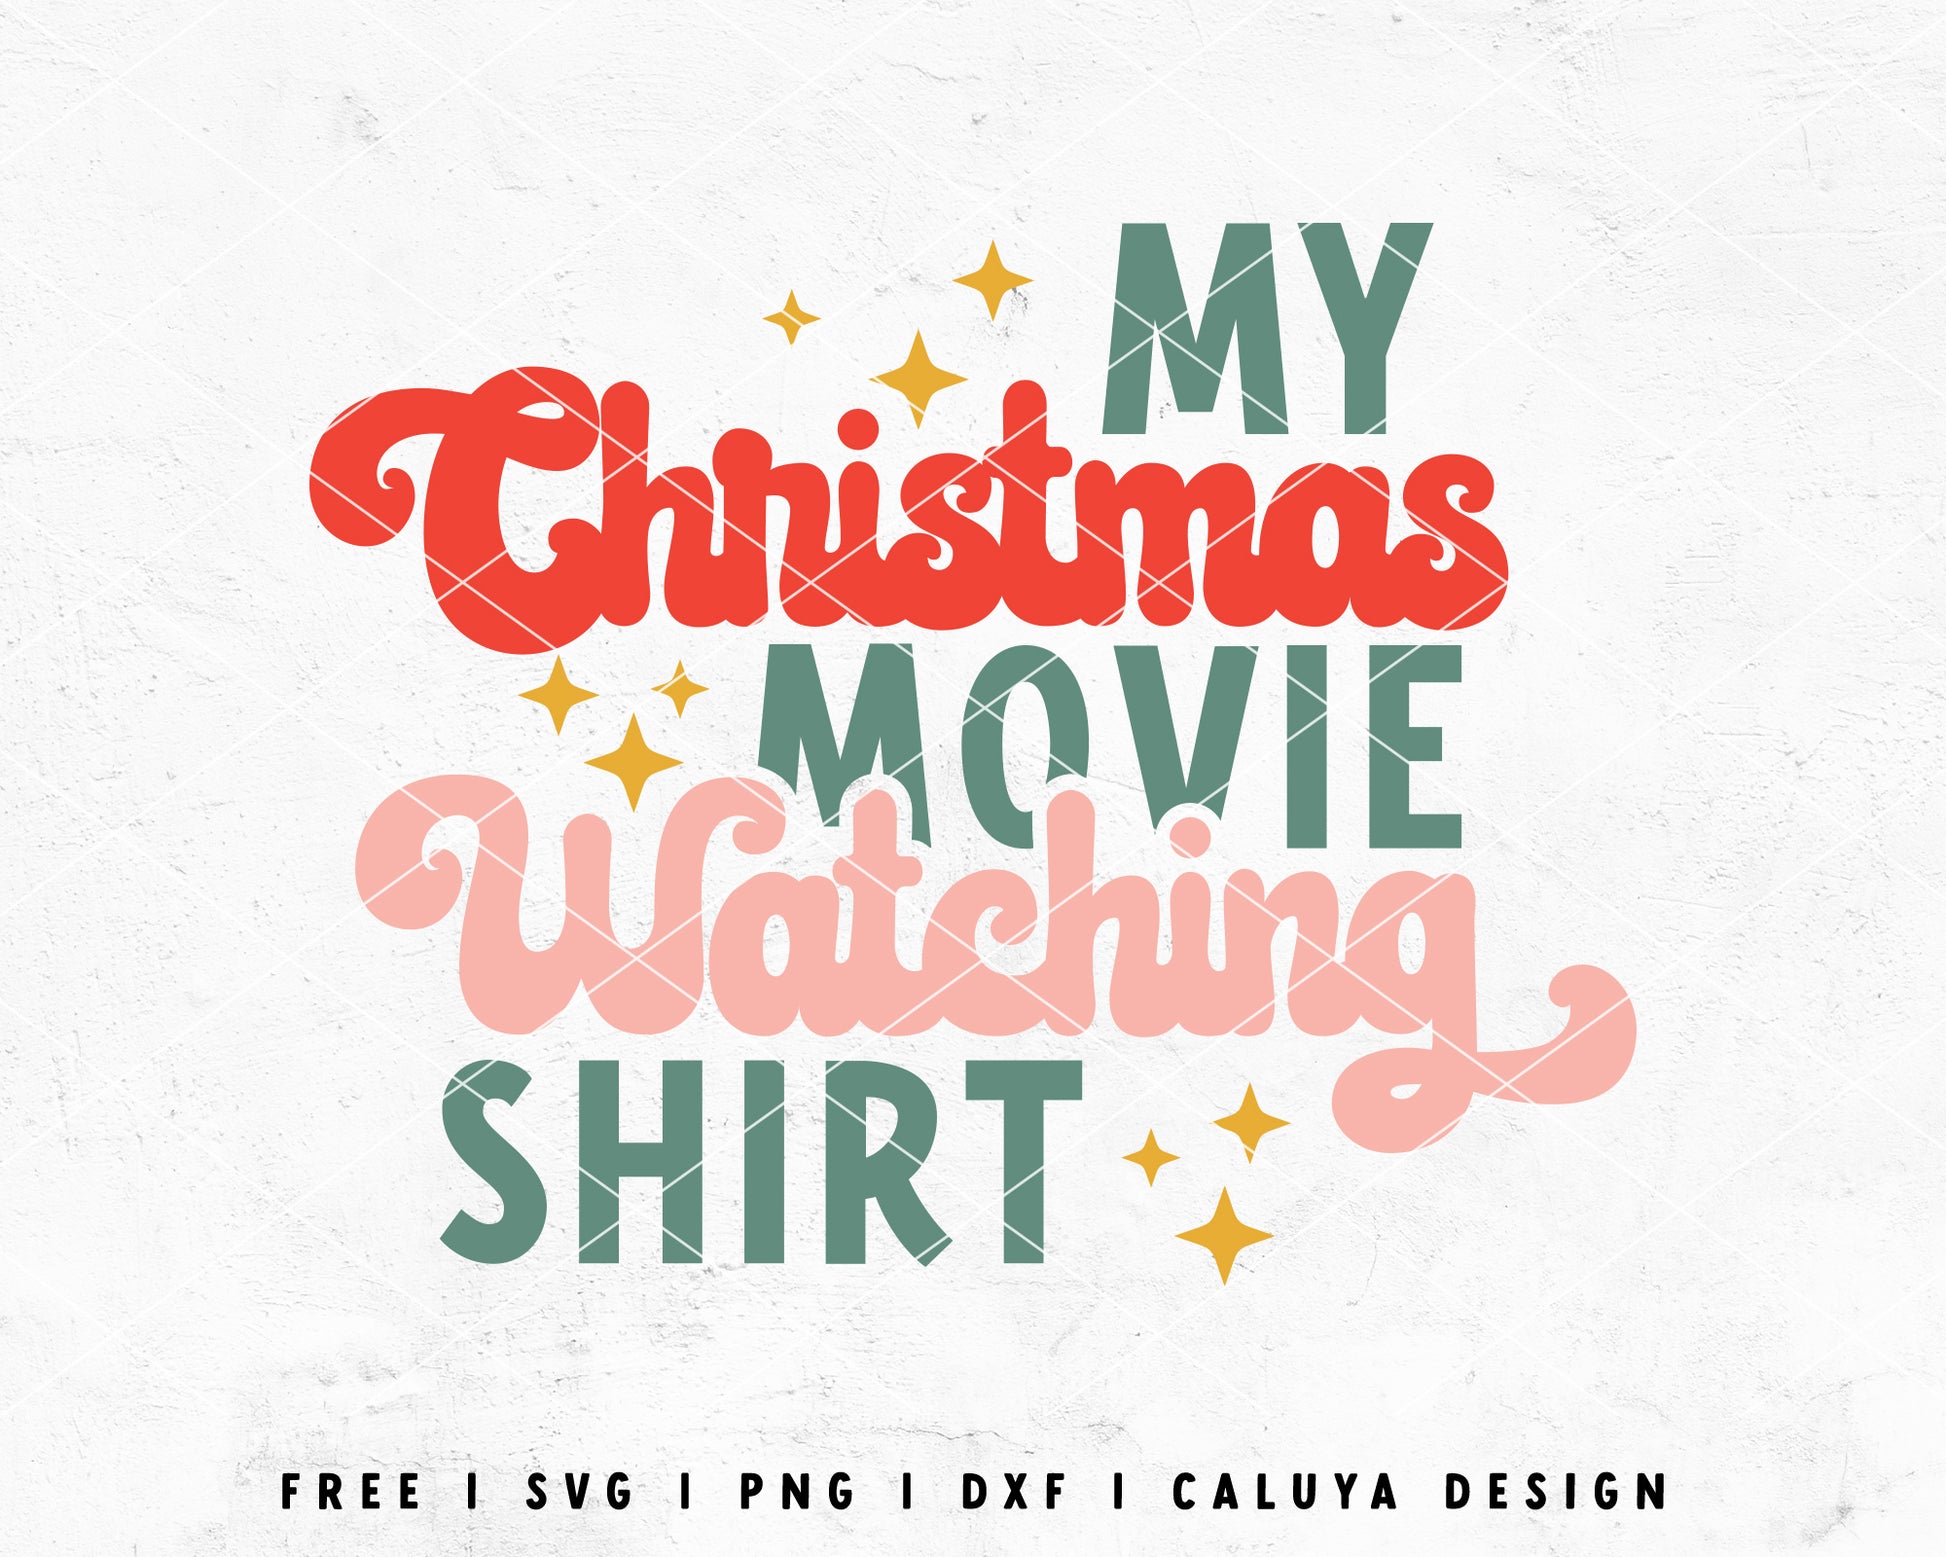 FREE Christmas Movie Watching Shirt SVG | Christmas Quote SVG Cut File for Cricut, Cameo Silhouette | Free SVG Cut File